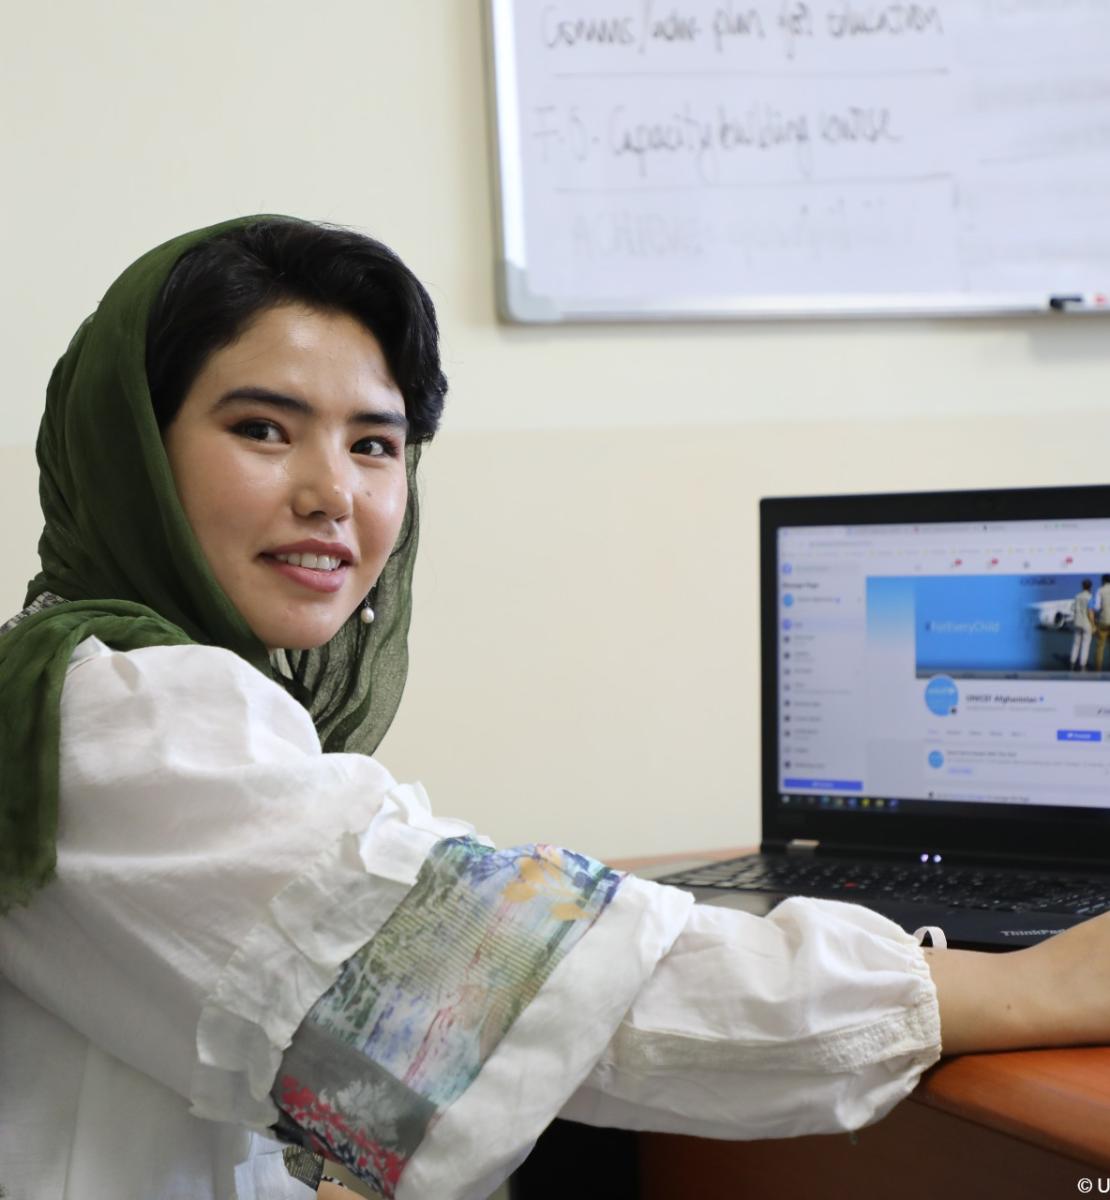 A young Afghan woman smiling at the camera, with a laptop on the desk in the background. 